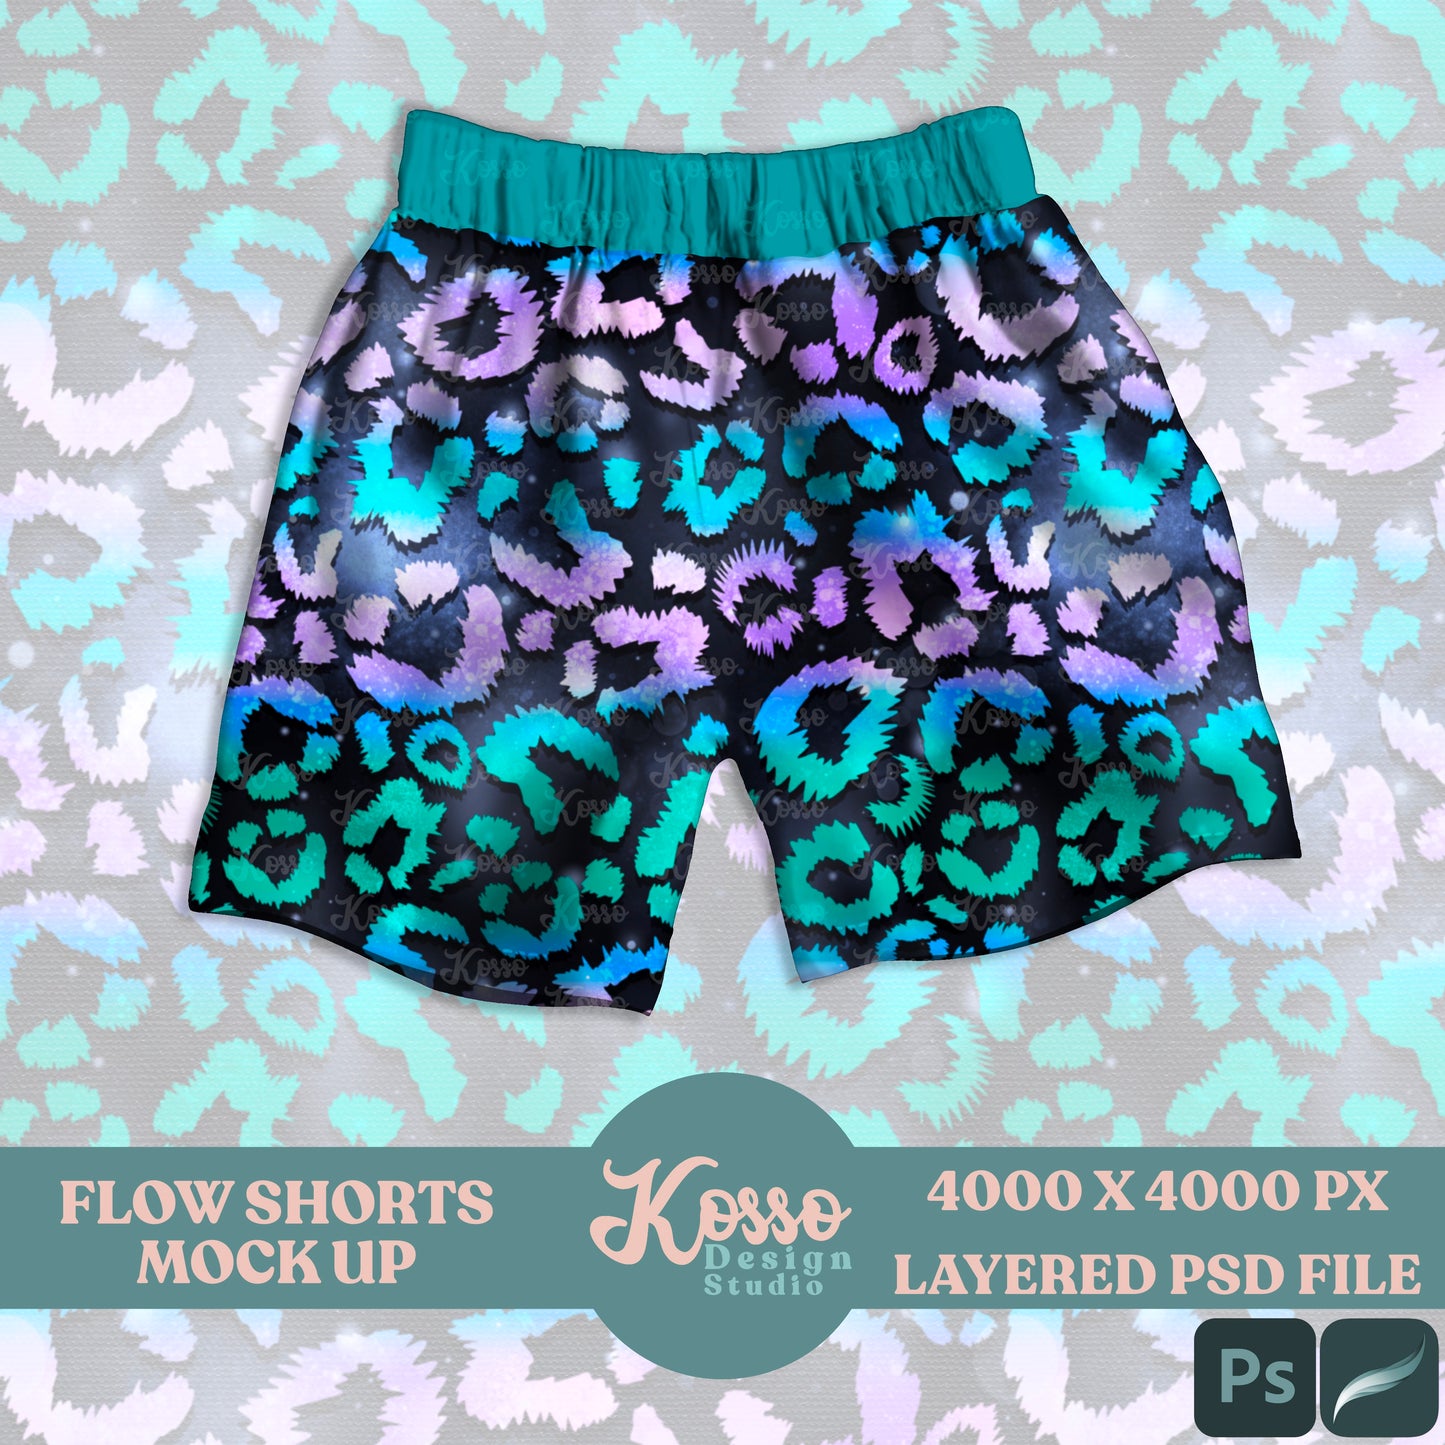 Realistic flow shorts mock up